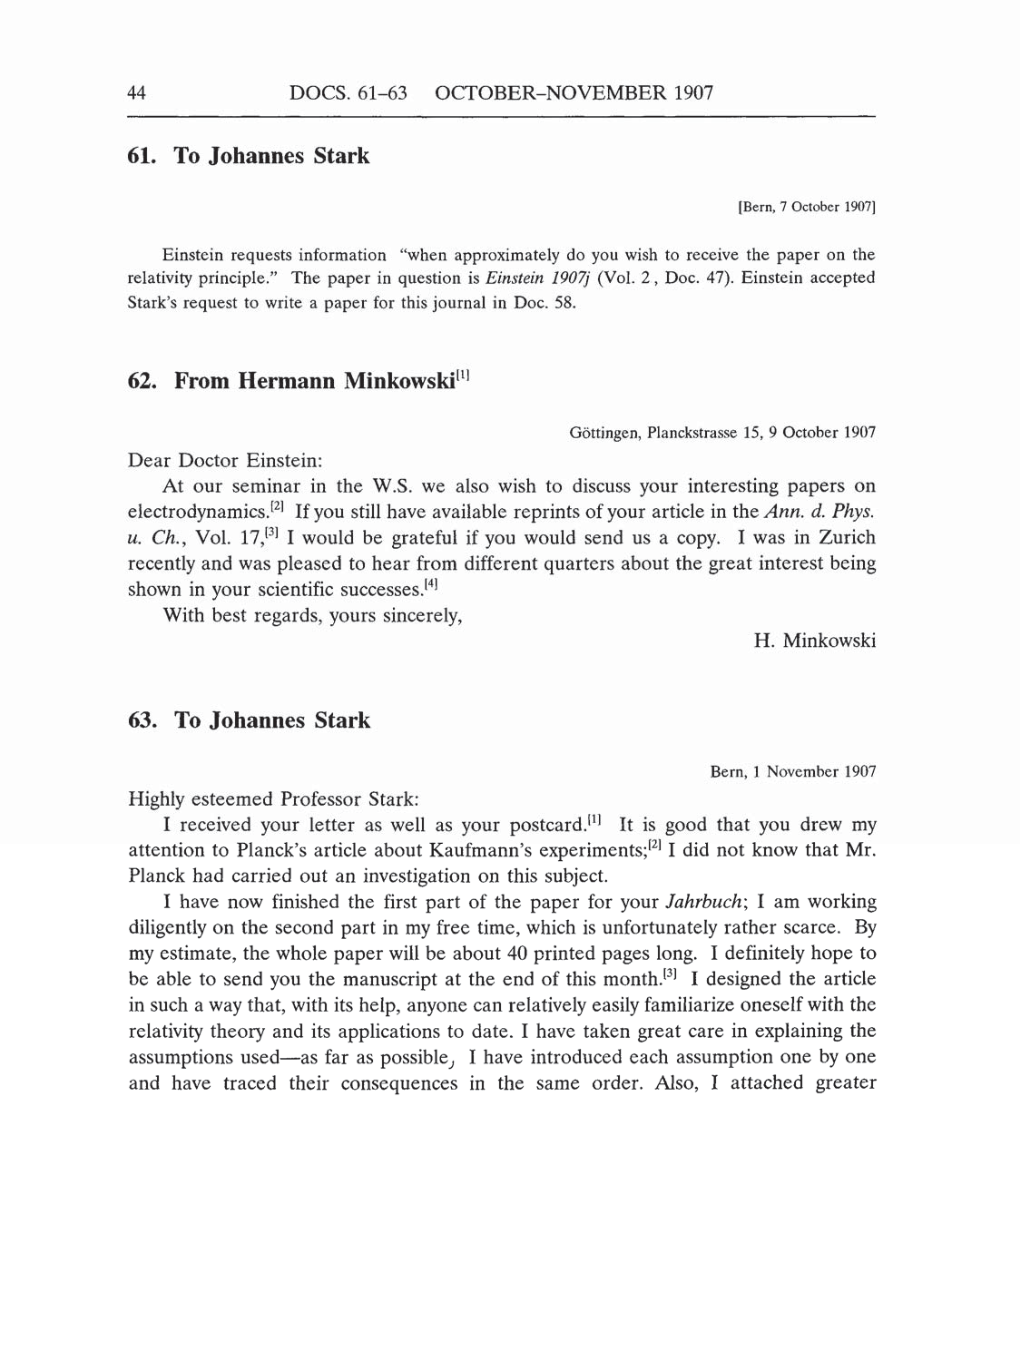 Volume 5: The Swiss Years: Correspondence, 1902-1914 (English translation supplement) page 44